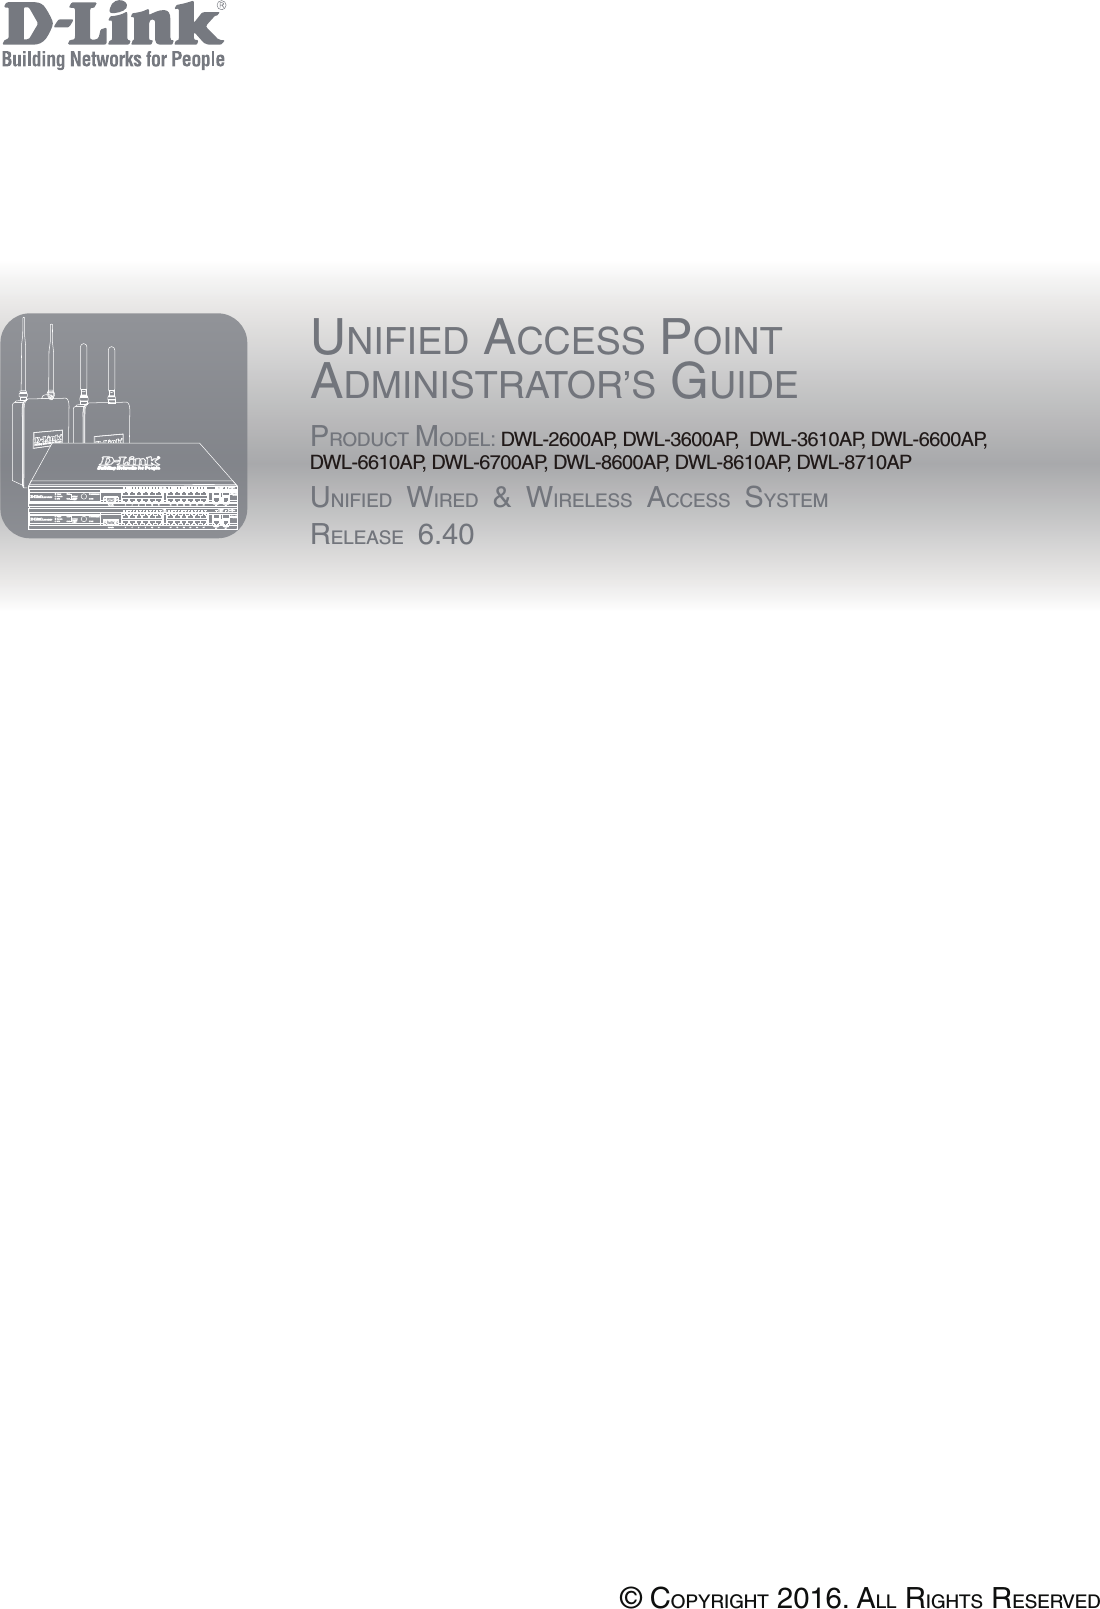 UNIFIED ACCESS POINTADMINISTRATOR’S GUIDEPRODUCT MODEL: DWL-2600AP, DWL-3600AP,  DWL-3610AP, DWL-6600AP, DWL-6610AP, DWL-6700AP, DWL-8600AP, DWL-8610AP, DWL-8710APUNIFIED WIRED &amp; WIRELESS ACCESS SYSTEMRELEASE 6.40© COPYRIGHT 2016. ALL RIGHTS RESERVED